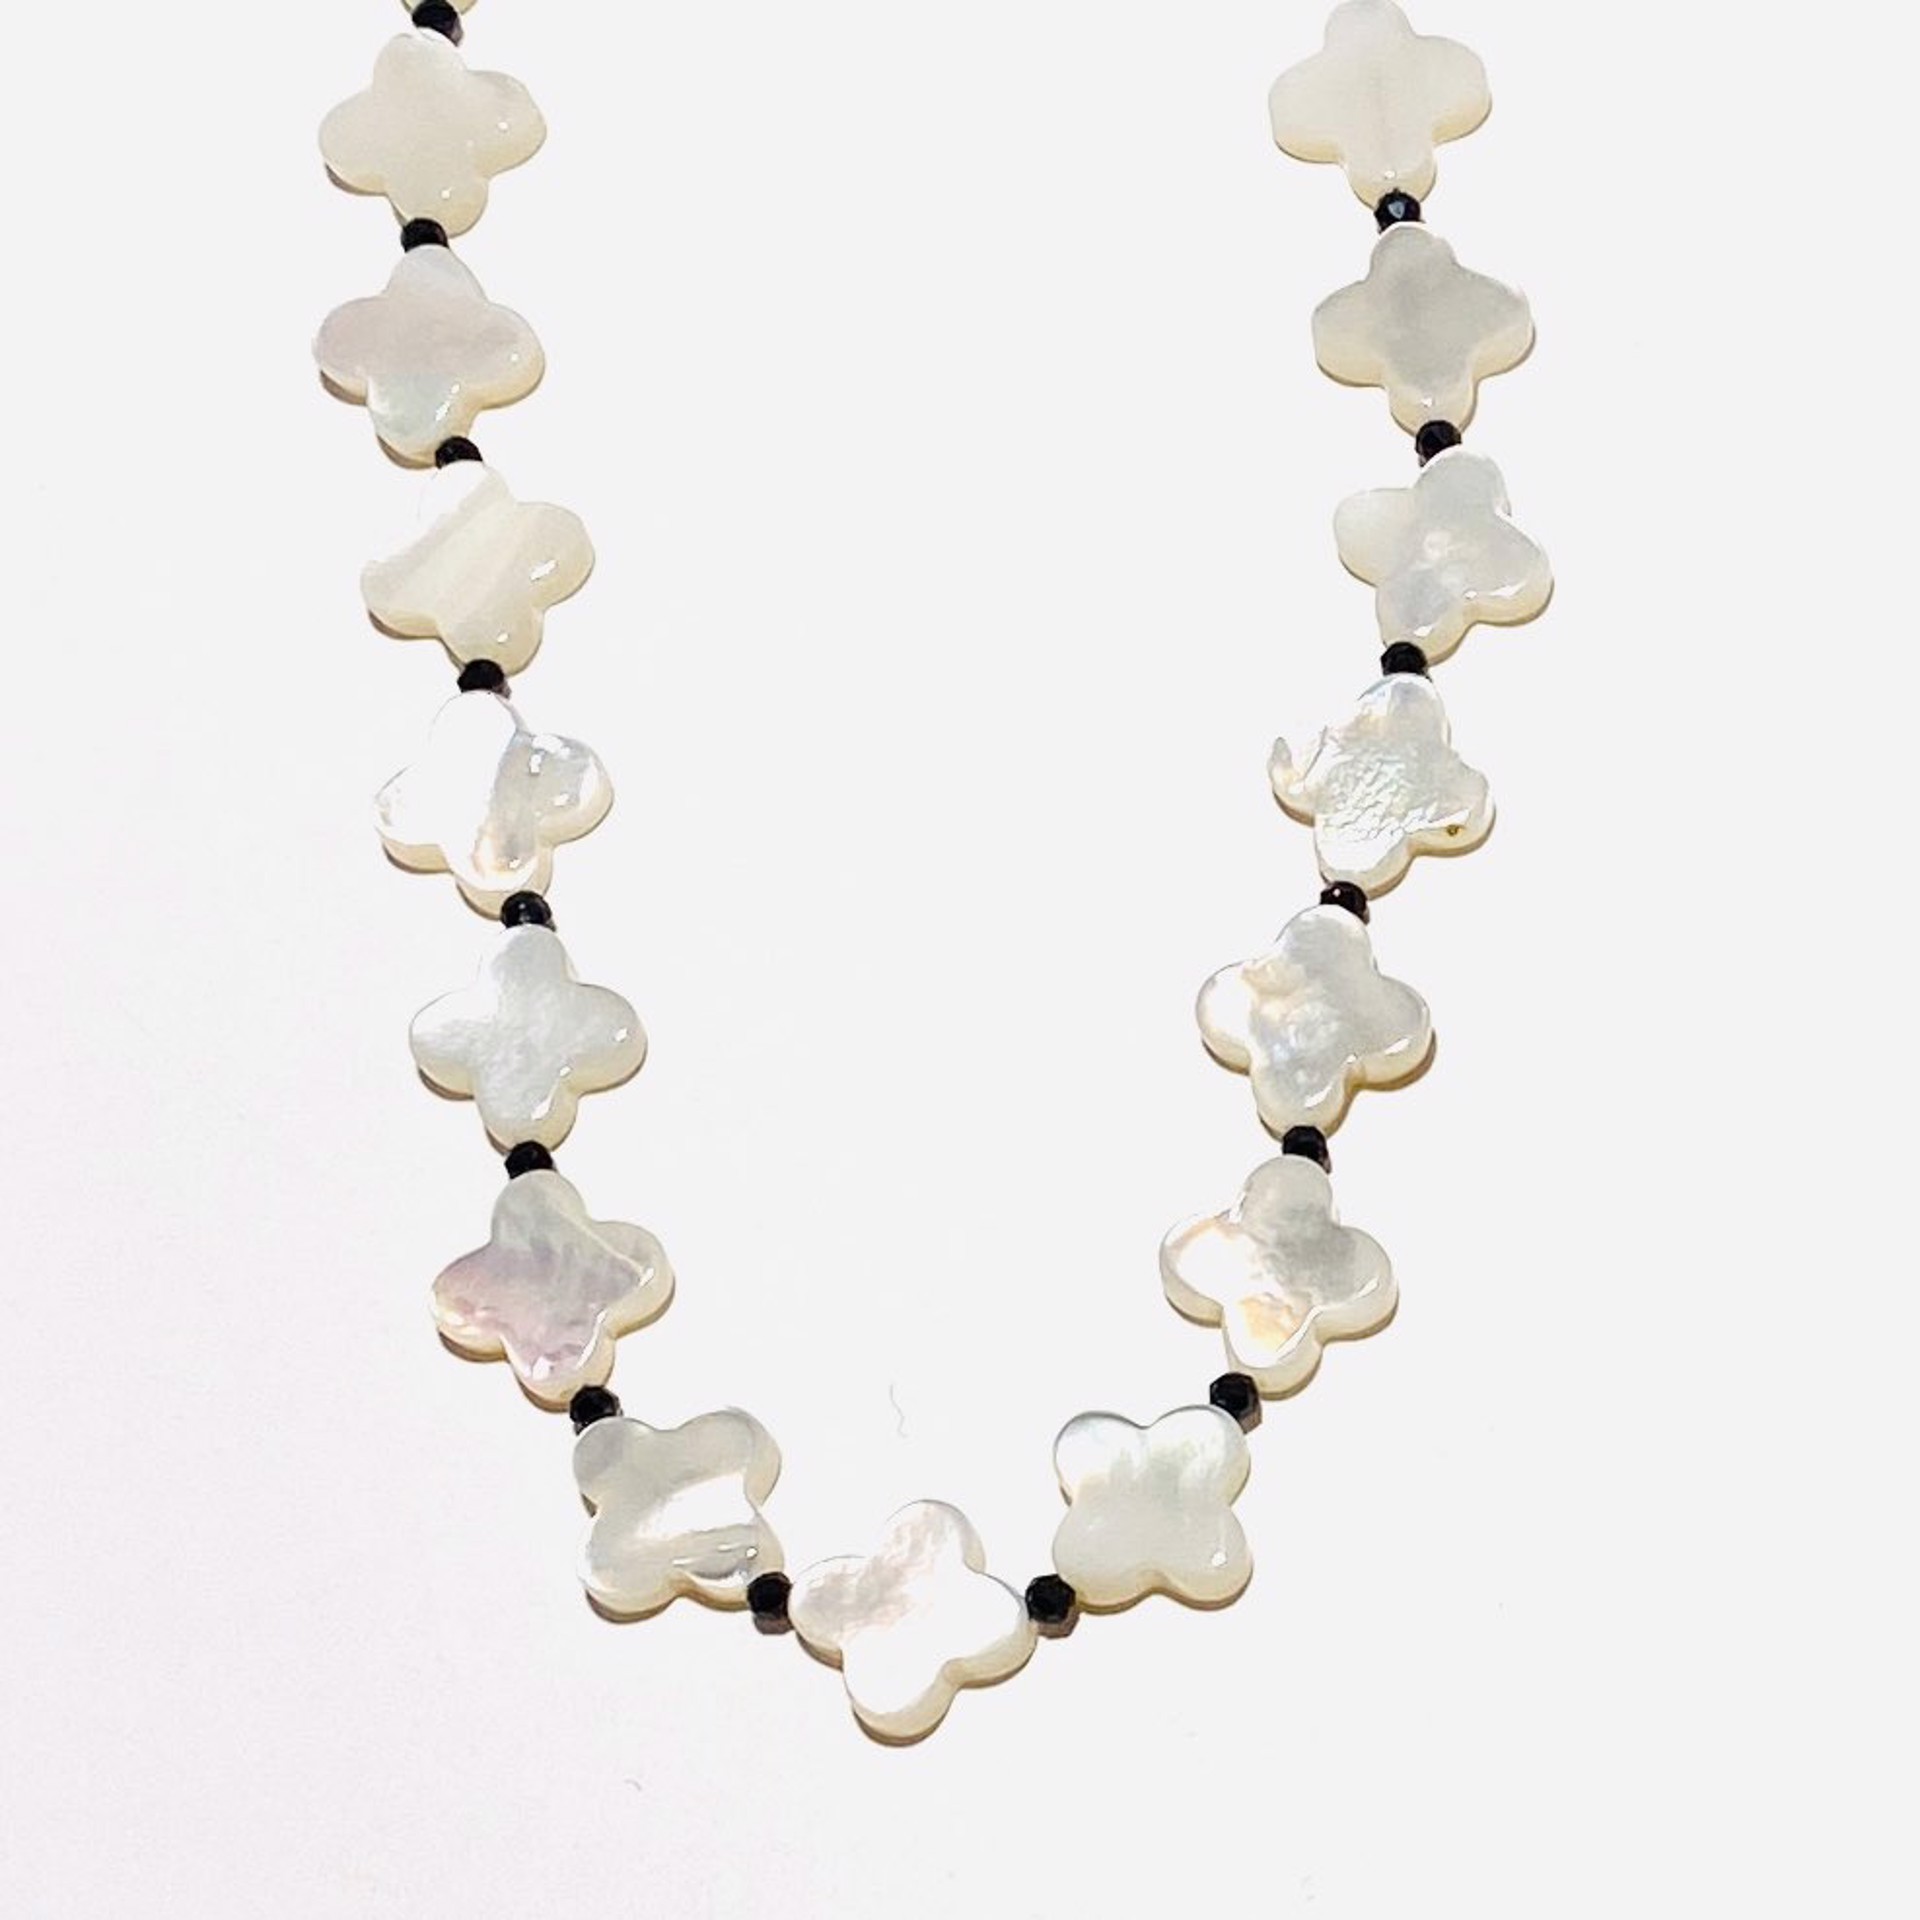 Clover Shaped Mother of Pearl, Black Spinel Necklace NT23-81 by Nance Trueworthy